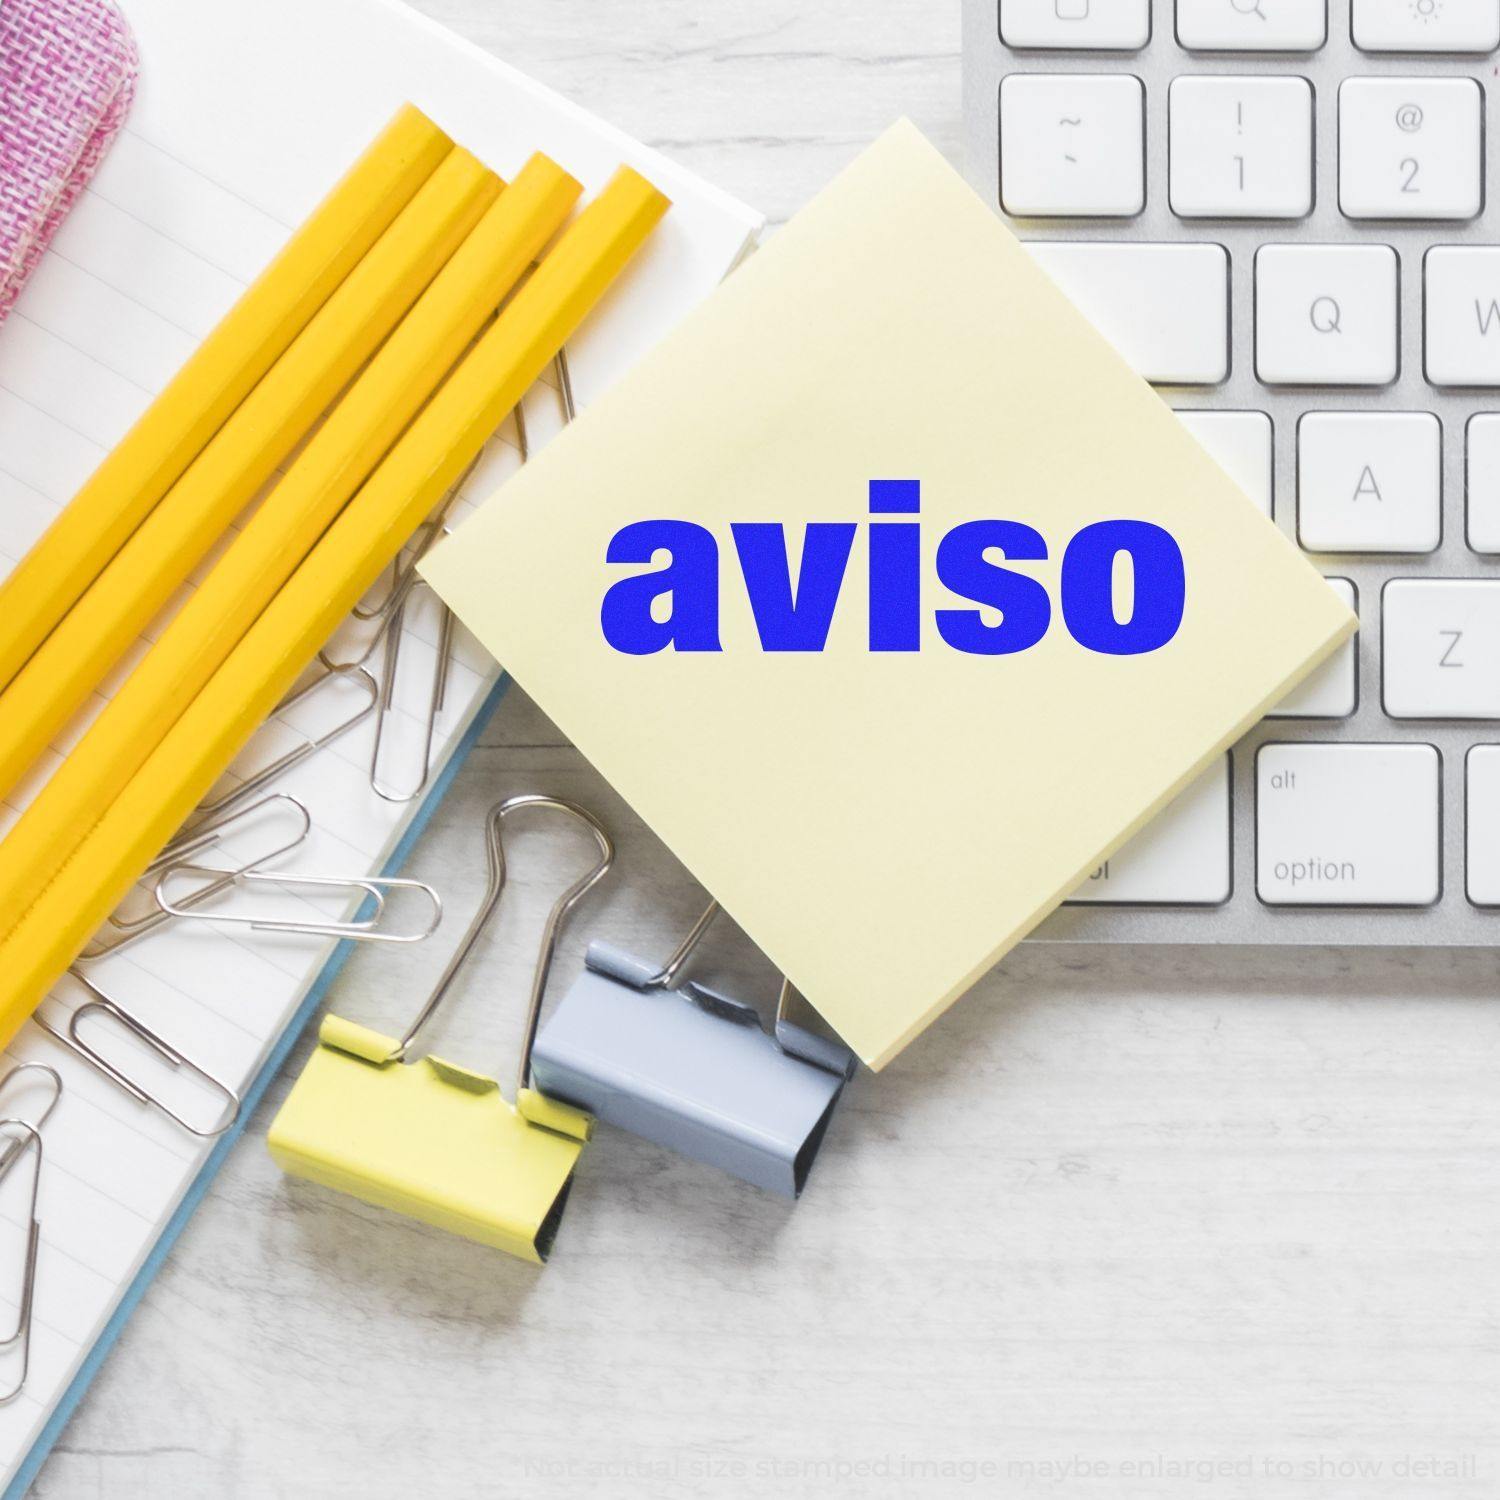 A stock office pre-inked stamp with a stamped image showing how the text "aviso" is displayed after stamping.